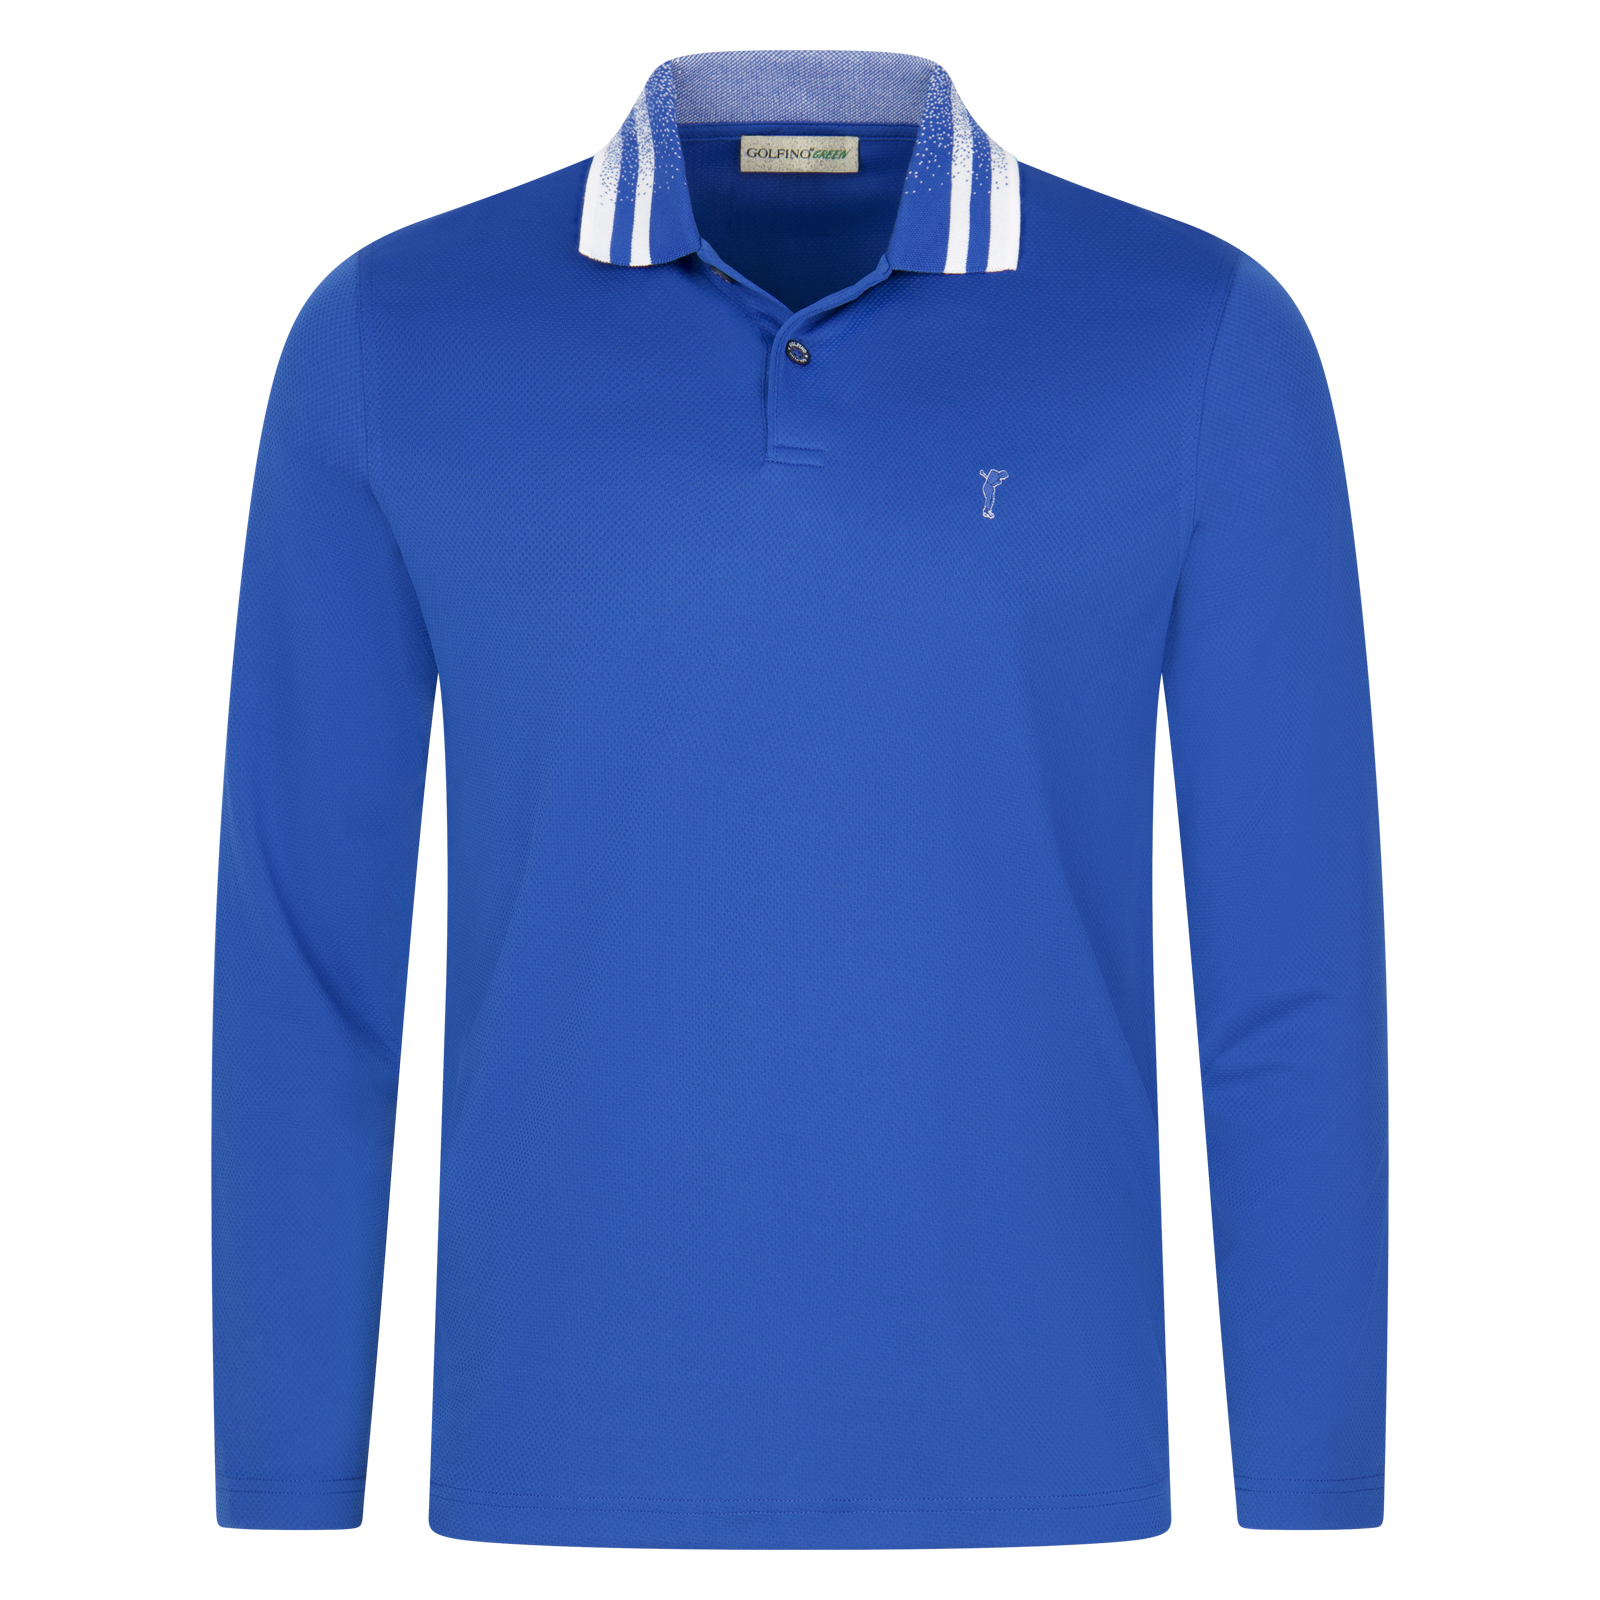 Men's long-sleeved antibacterial golf polo shirt in sustainable Kafetex®.